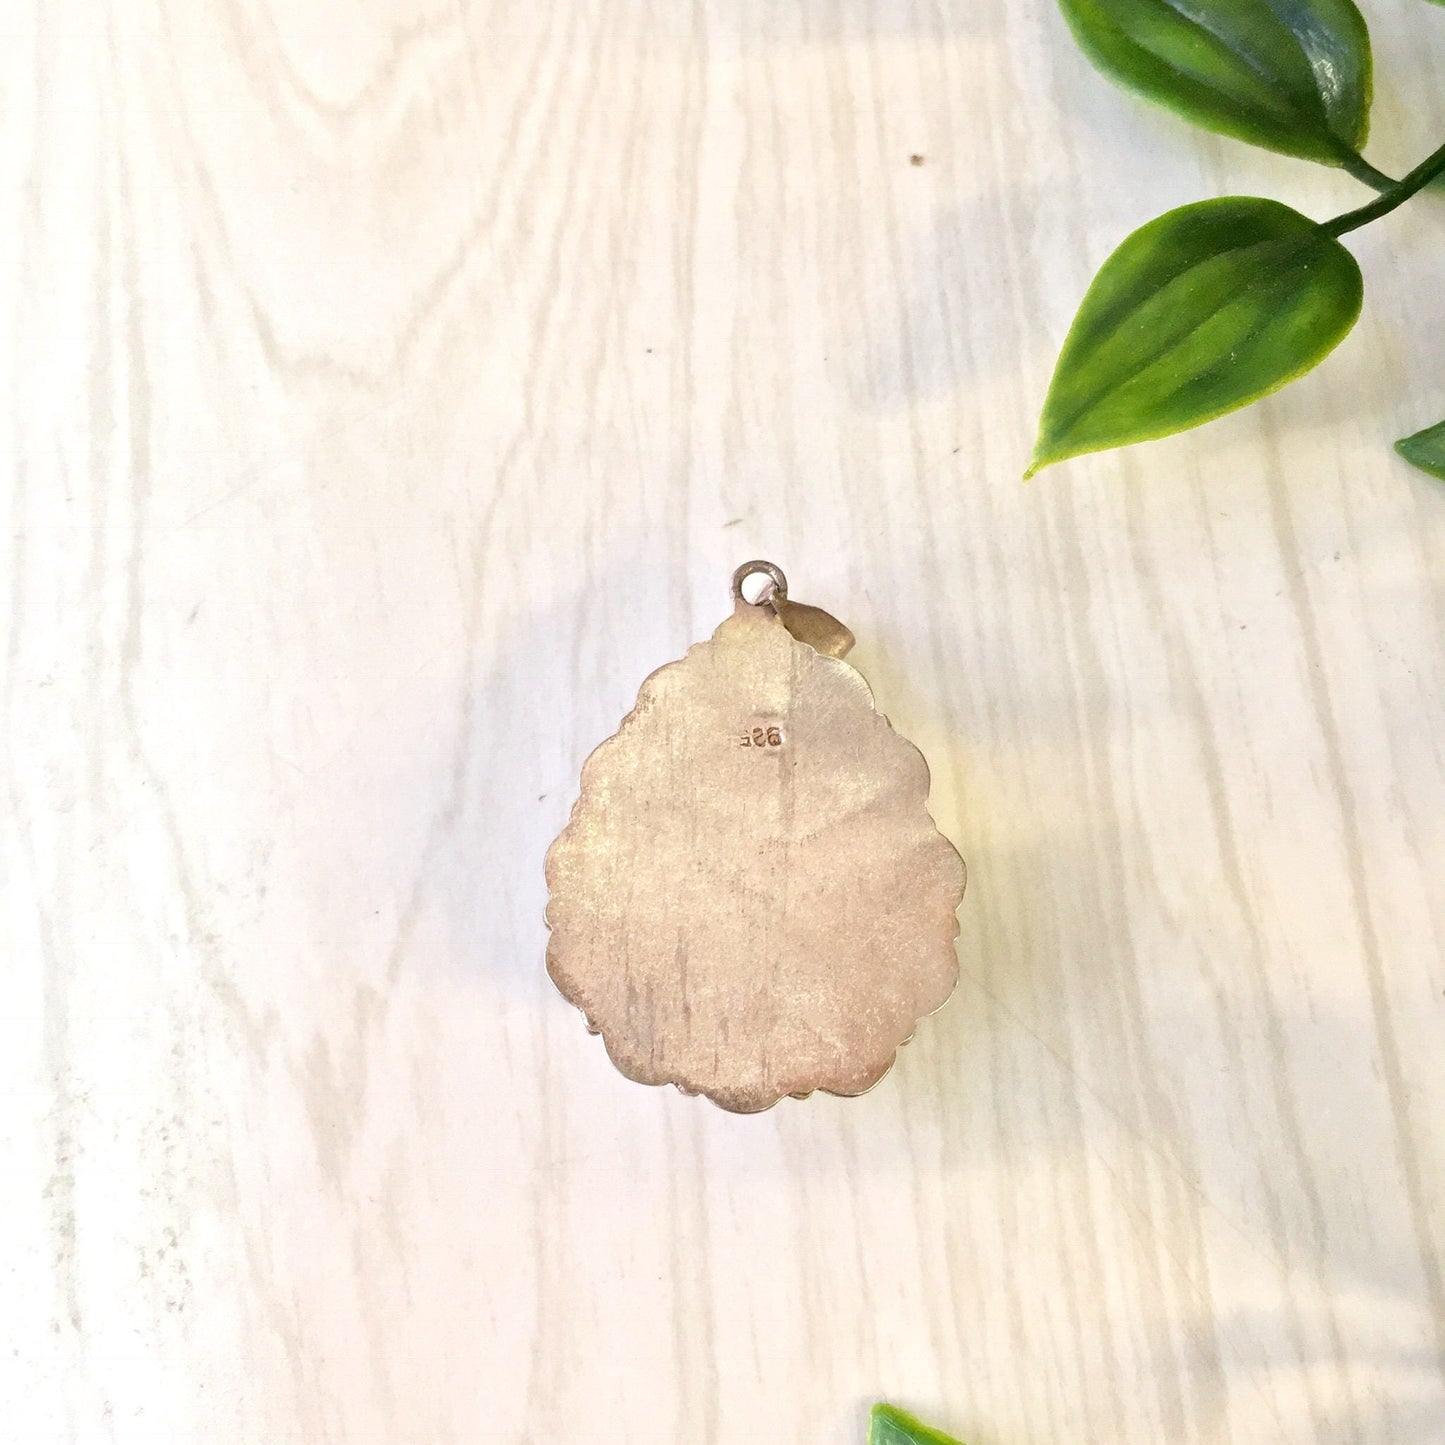 Vintage sterling silver pendant with an opalite gemstone displaying shimmering blue and green hues, placed on a light wooden surface with green leaves.